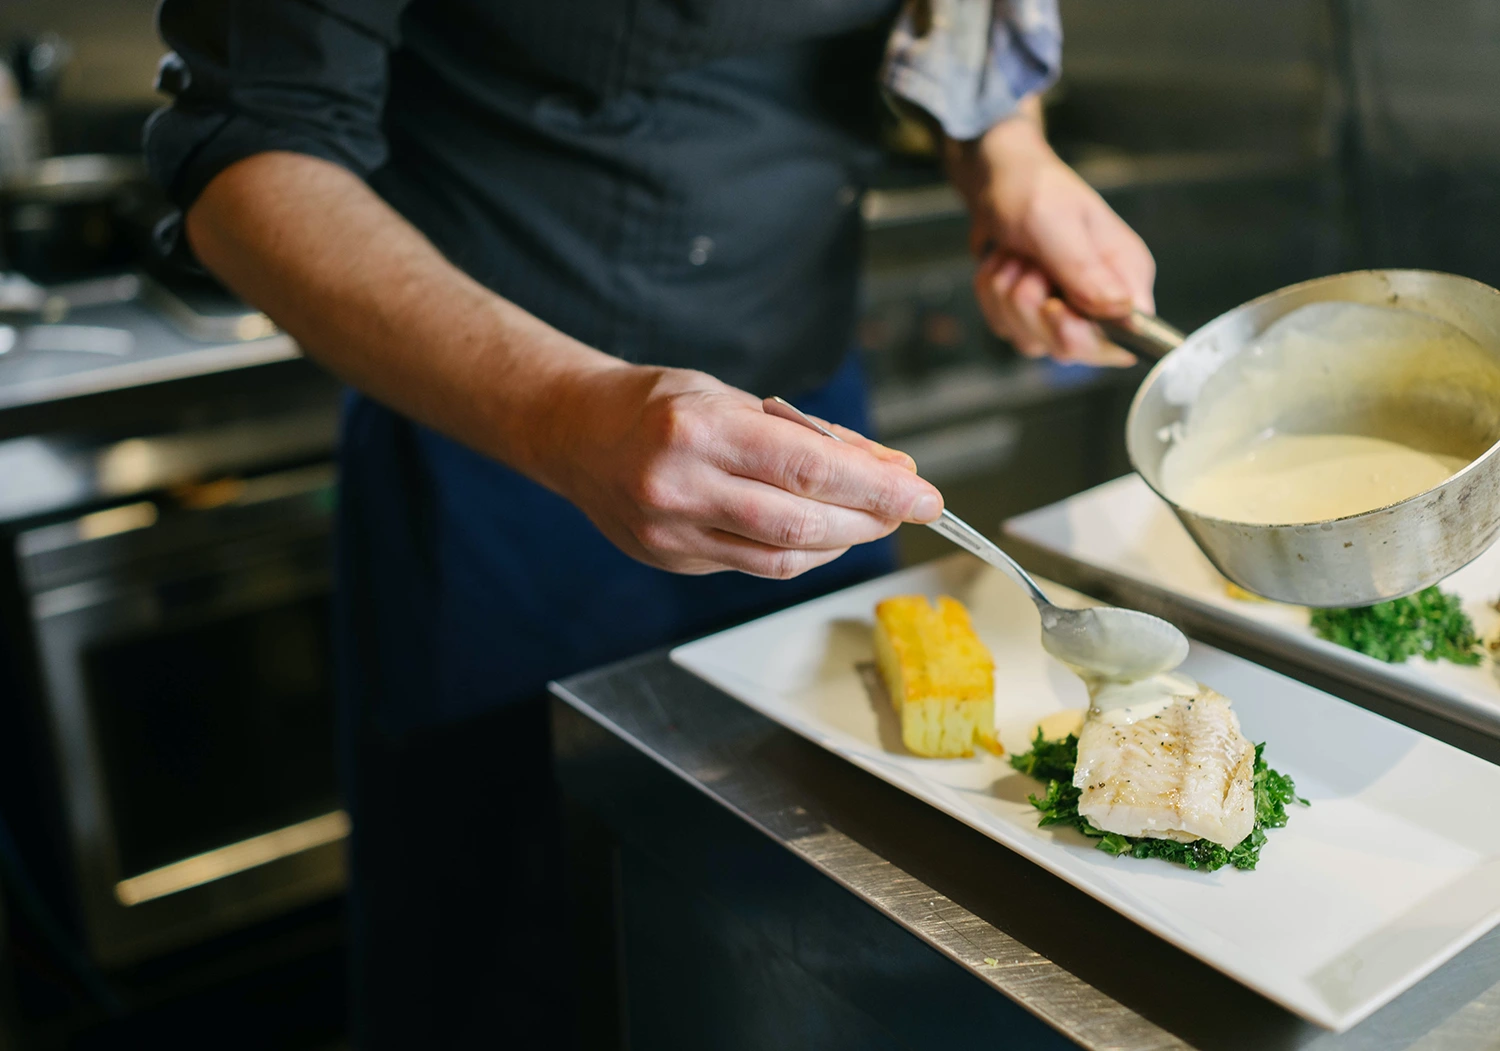 Chef pouring sauce on a plate of food to increase restaurant loyalty.